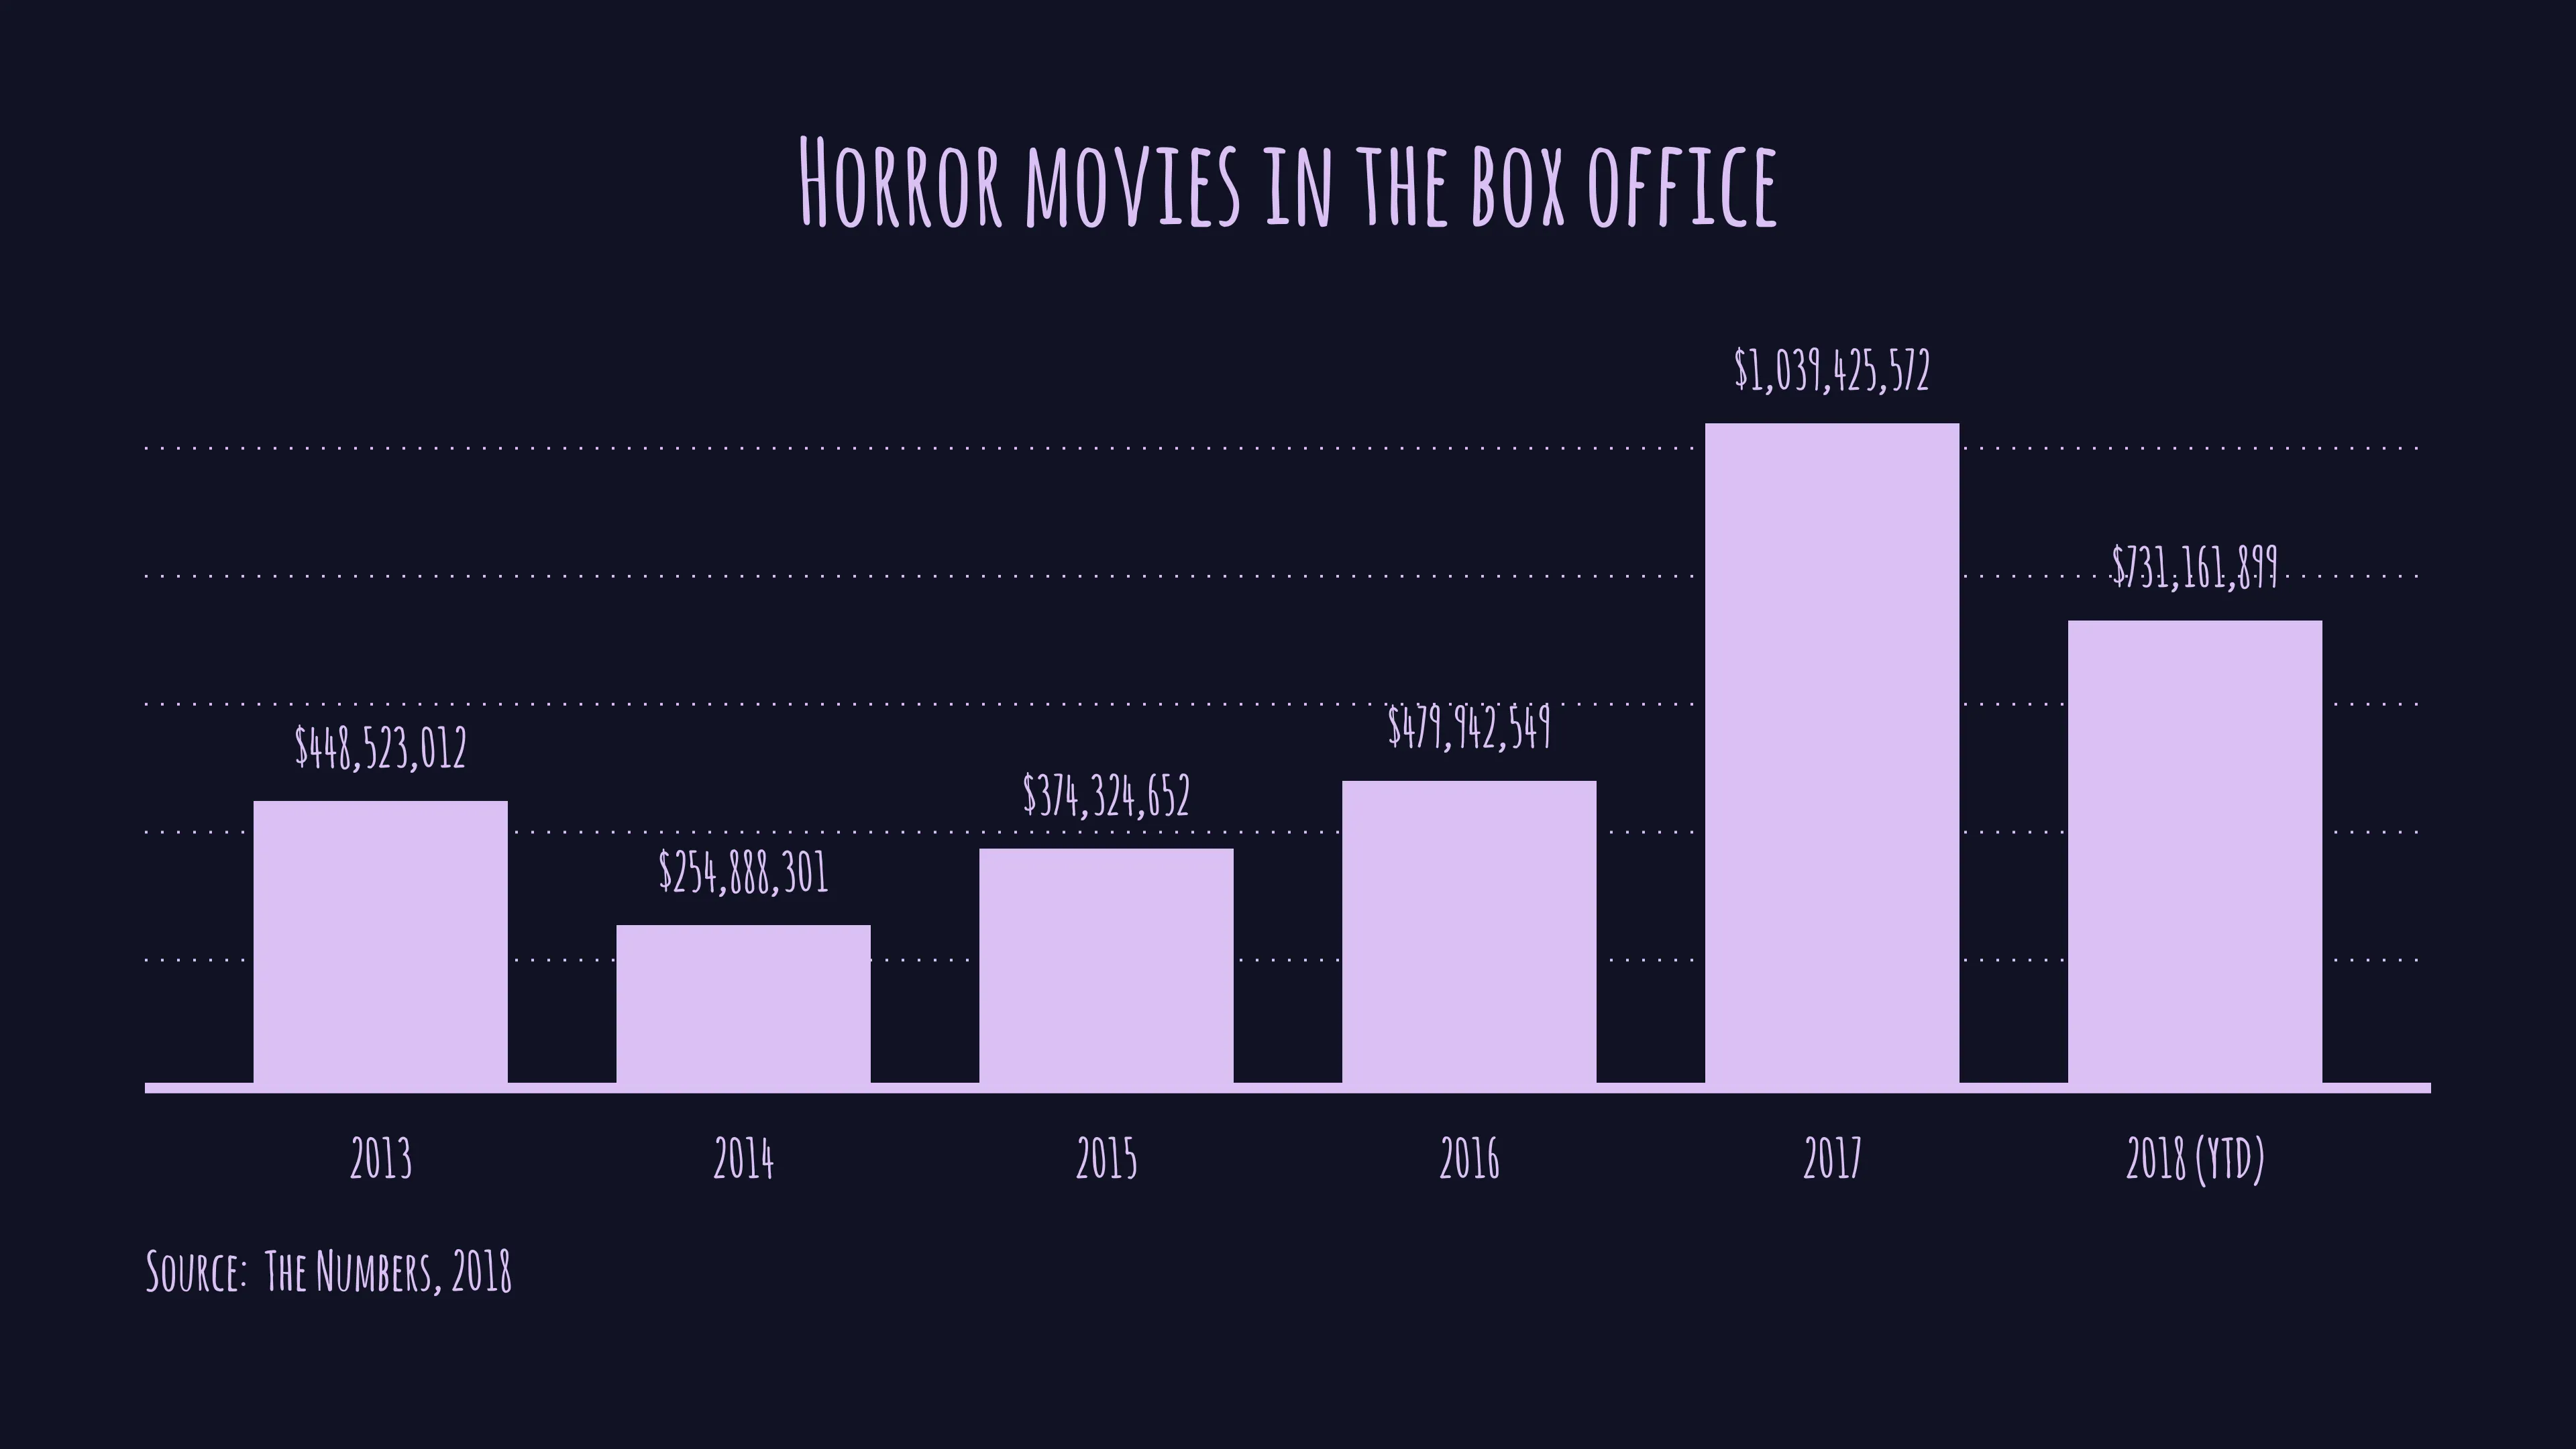 Horror movies in the box office